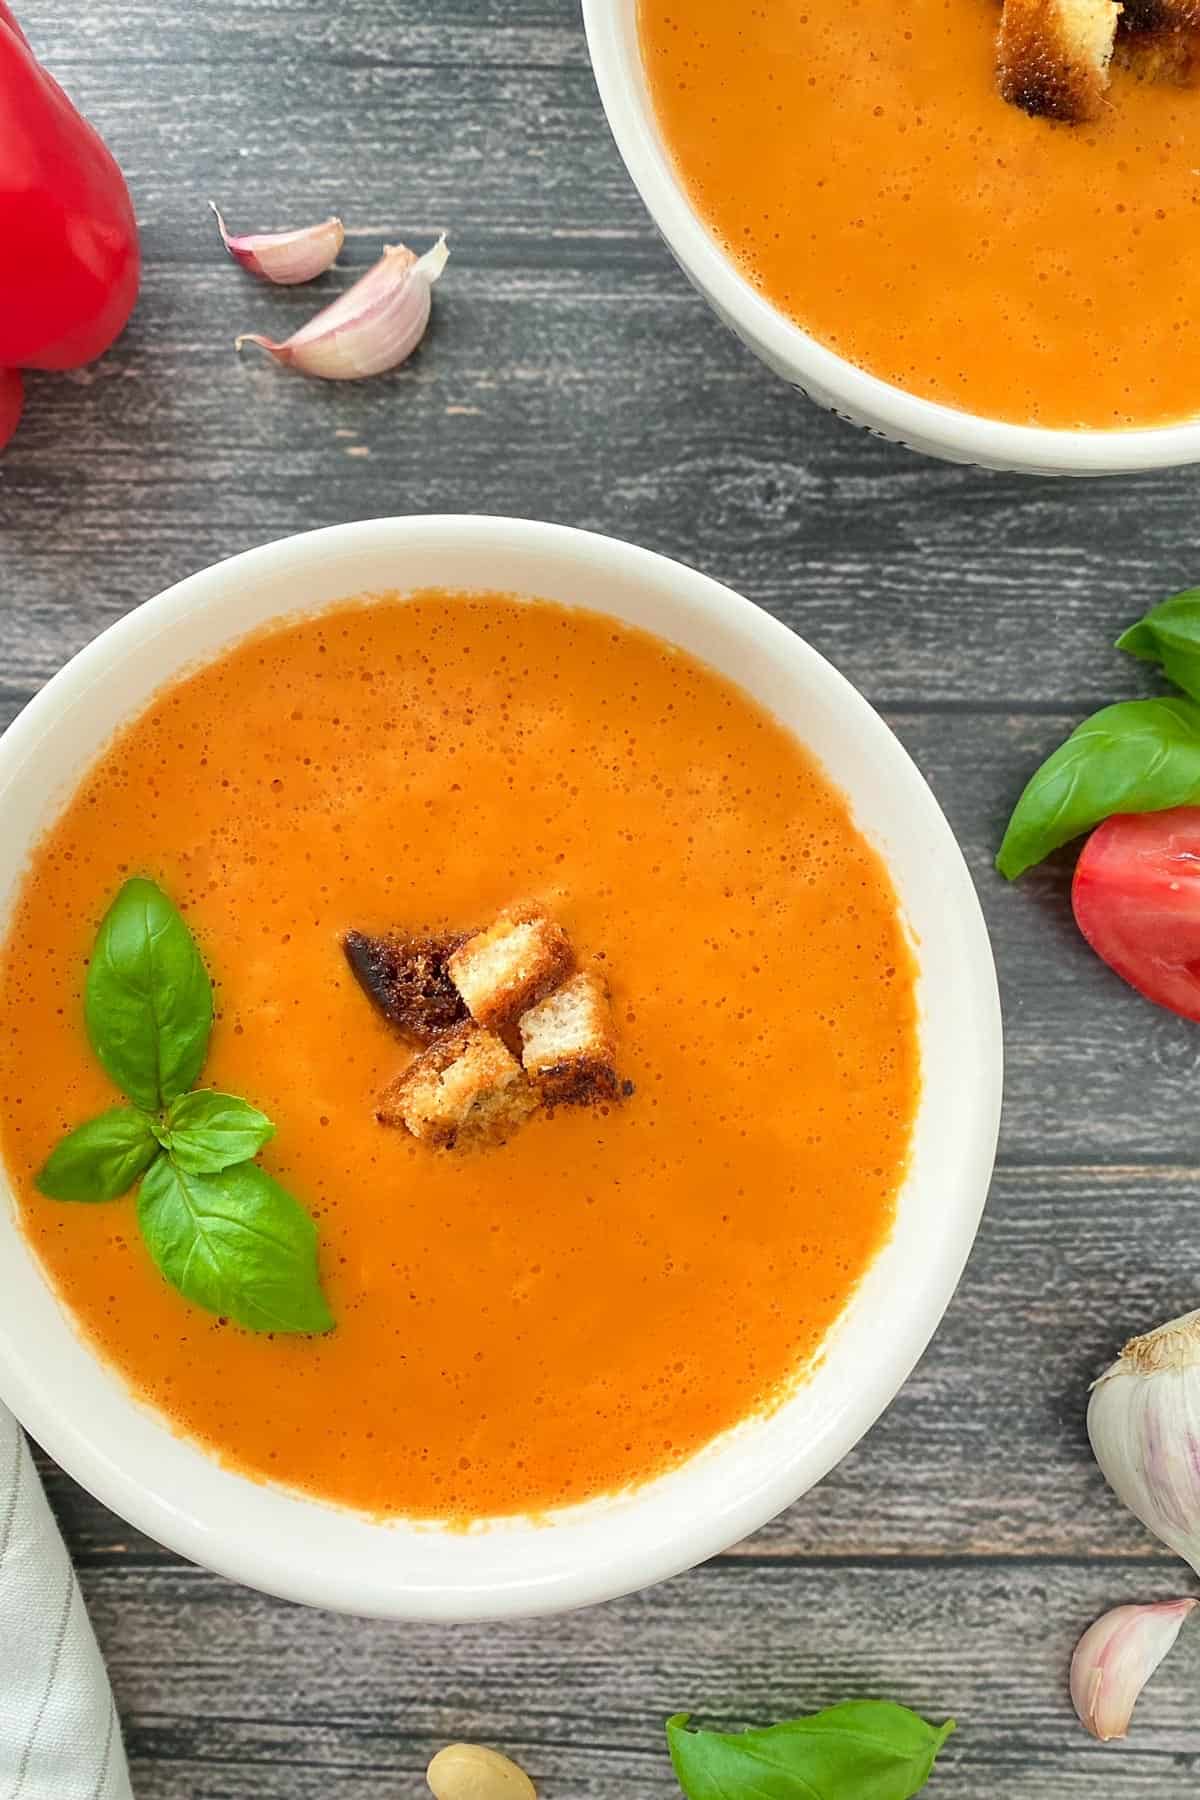 Two bowls of tomato soup with croutons in the center and basil garnish.